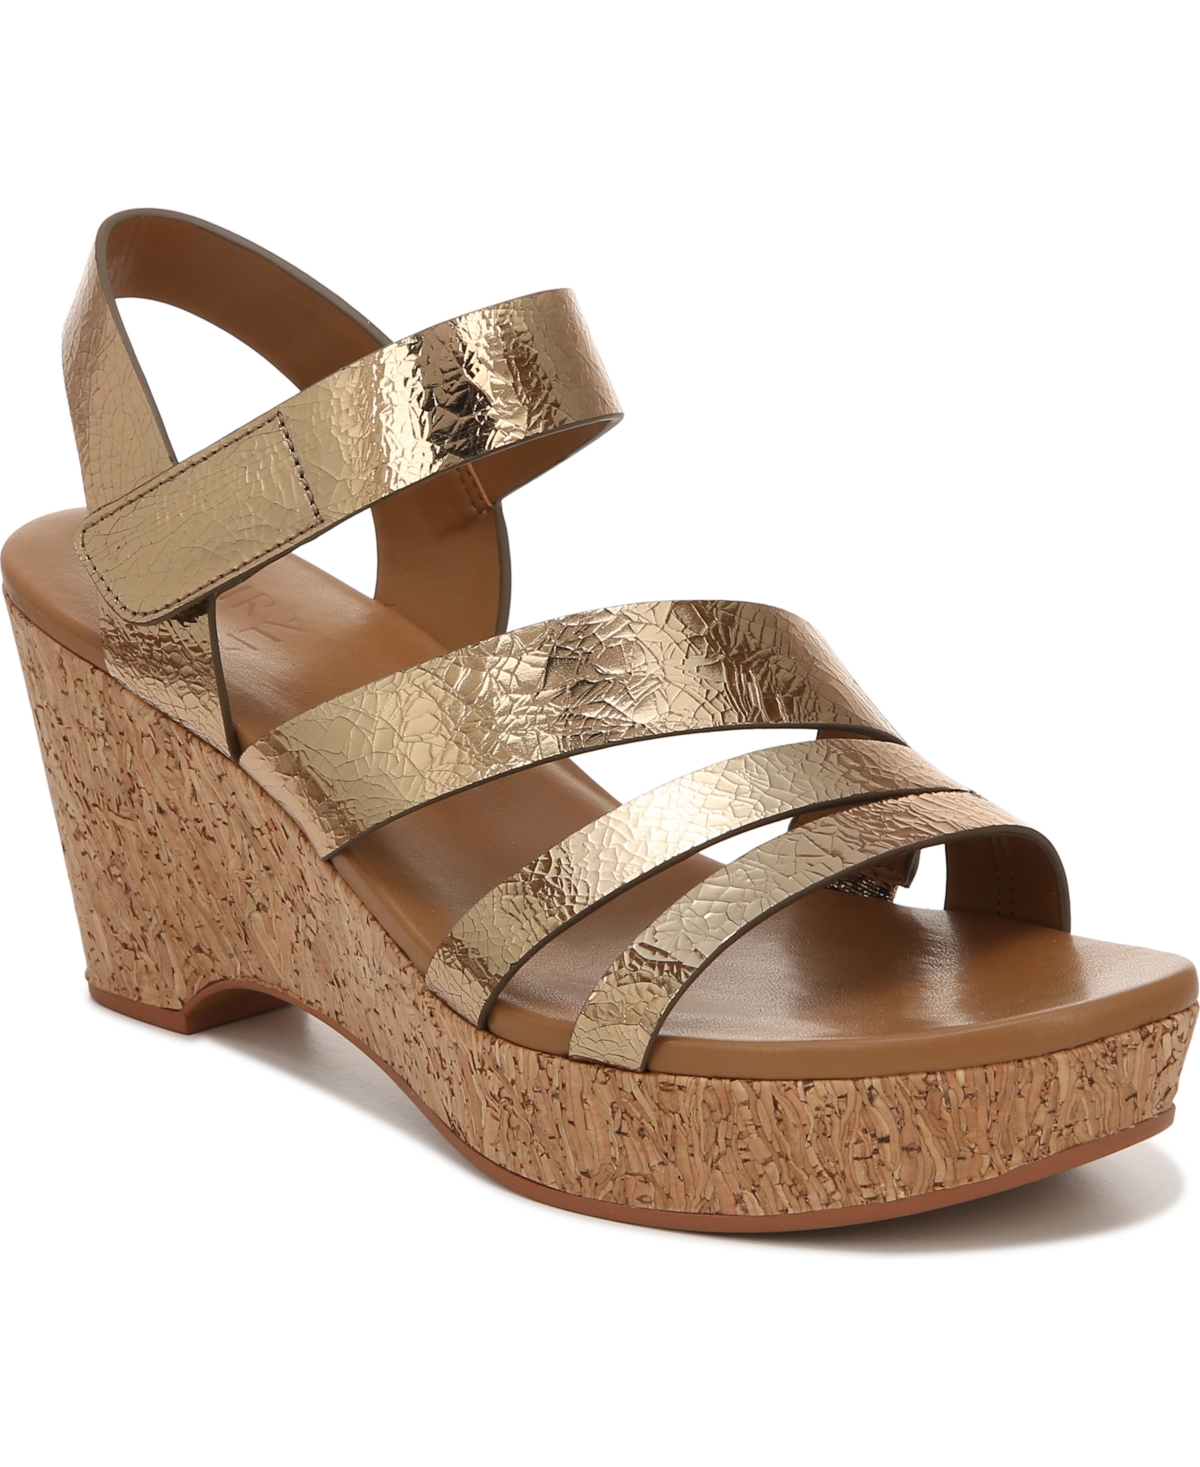 NATURALIZER CYNTHIA ANKLE STRAP SANDALS